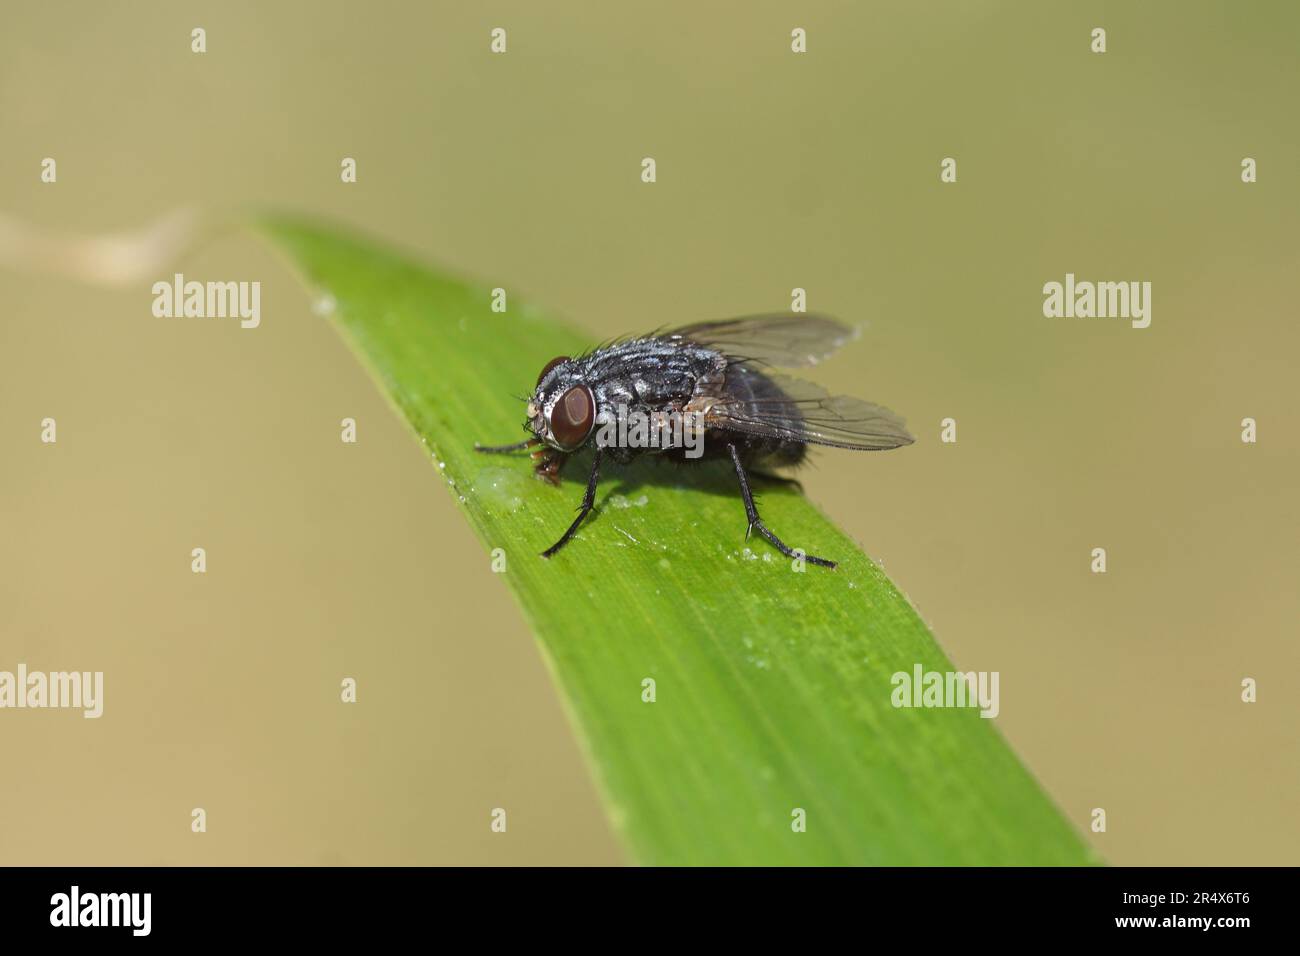 https://c8.alamy.com/comp/2R4X6T6/closeup-female-fly-muscina-prolapsa-family-house-flies-muscidae-on-a-bamboo-leaf-spring-may-netherlands-2R4X6T6.jpg